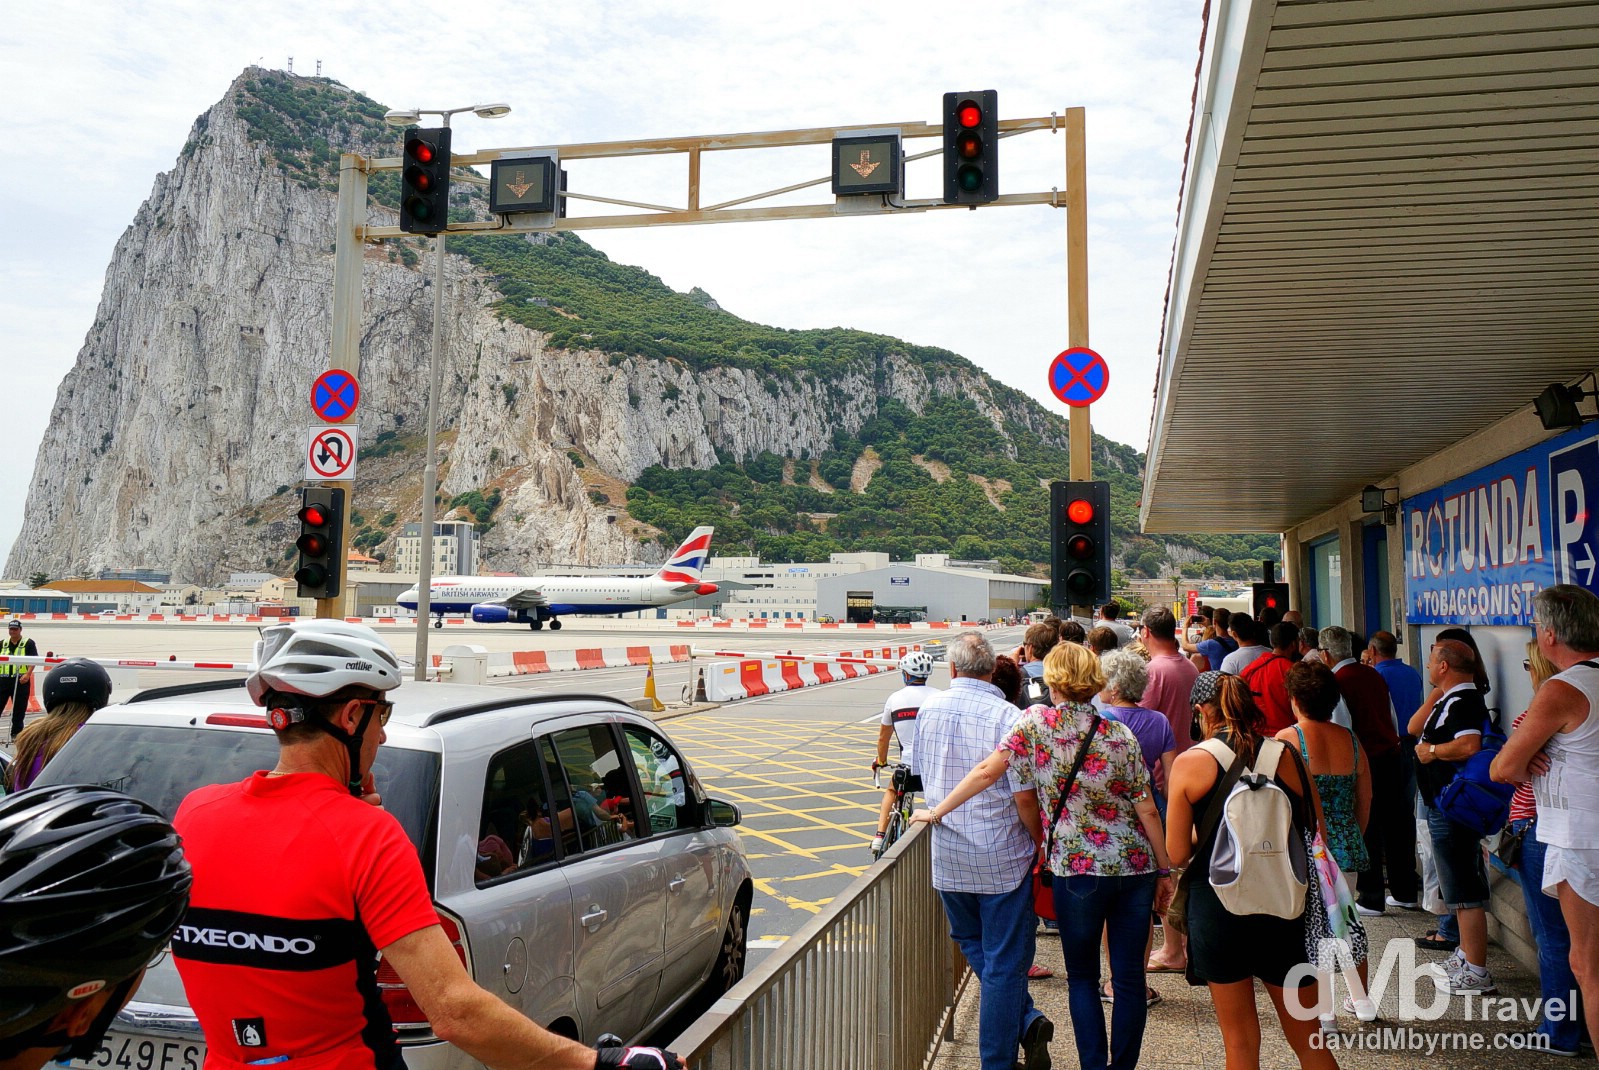 Pedestrians waiting for an arriving BA plane to taxi to its gate to enable passage across the runway of the International Airport in Gibraltar. June 5th, 2014.